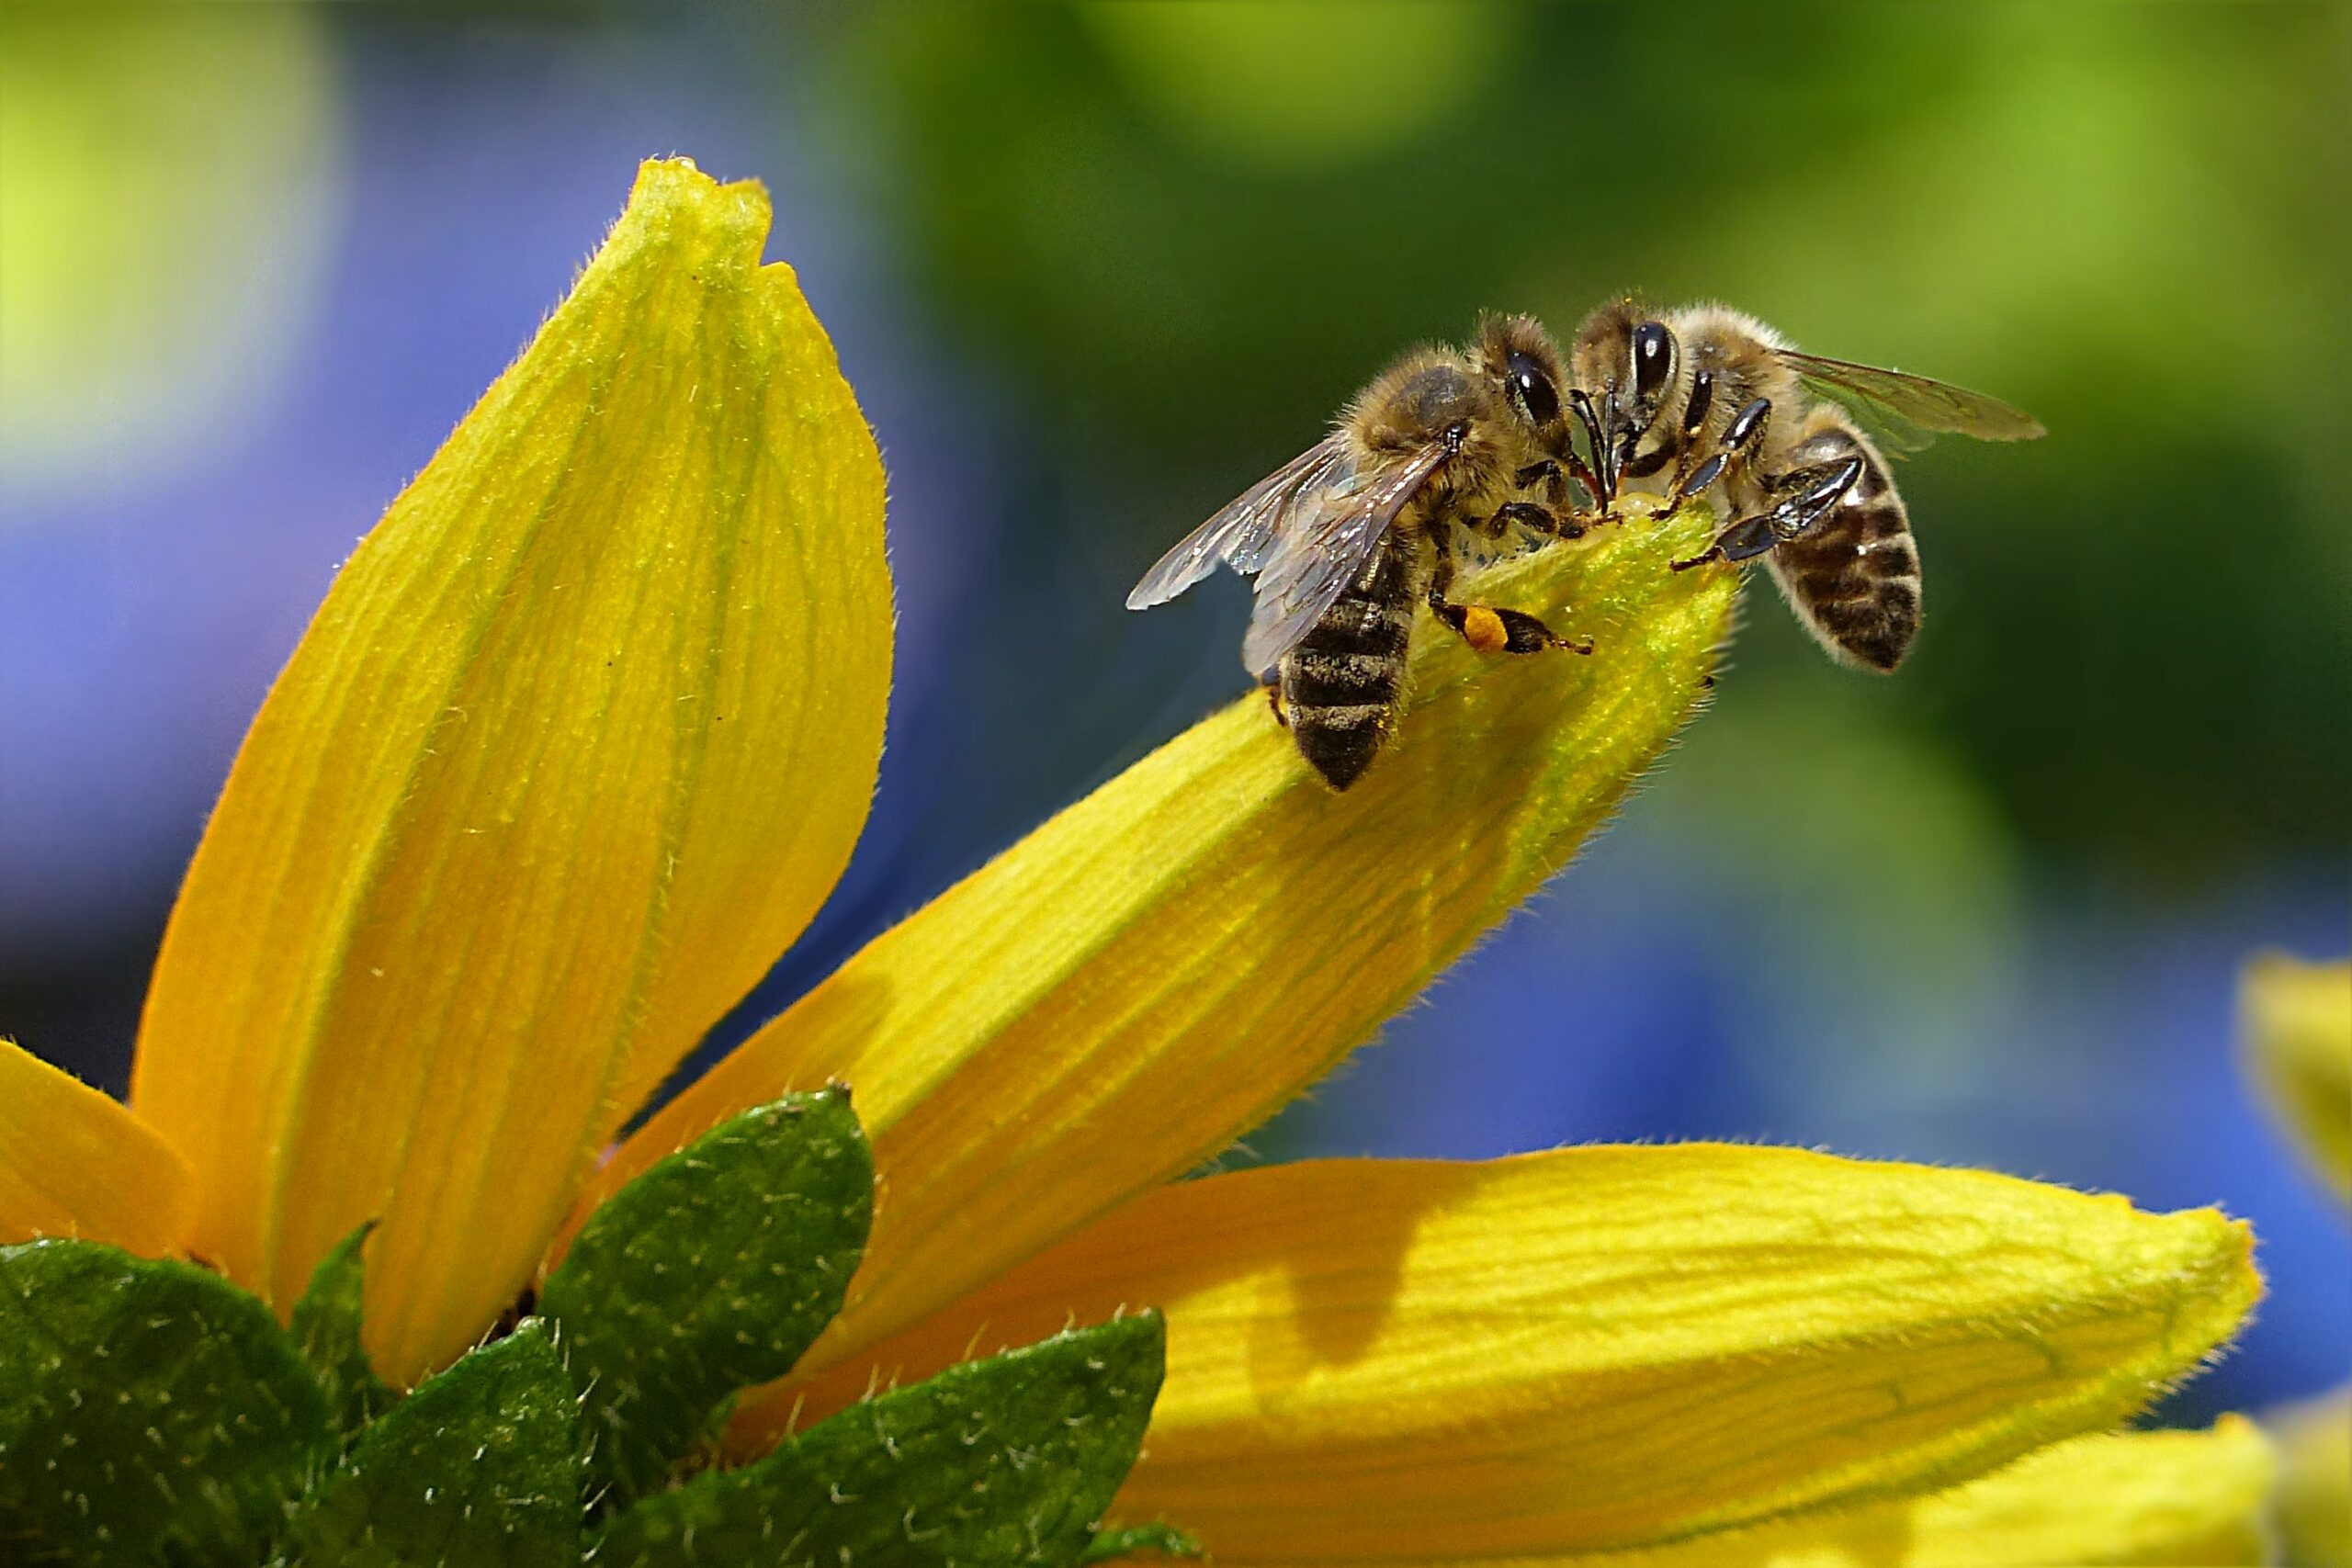 Image of two honey bees on a flower